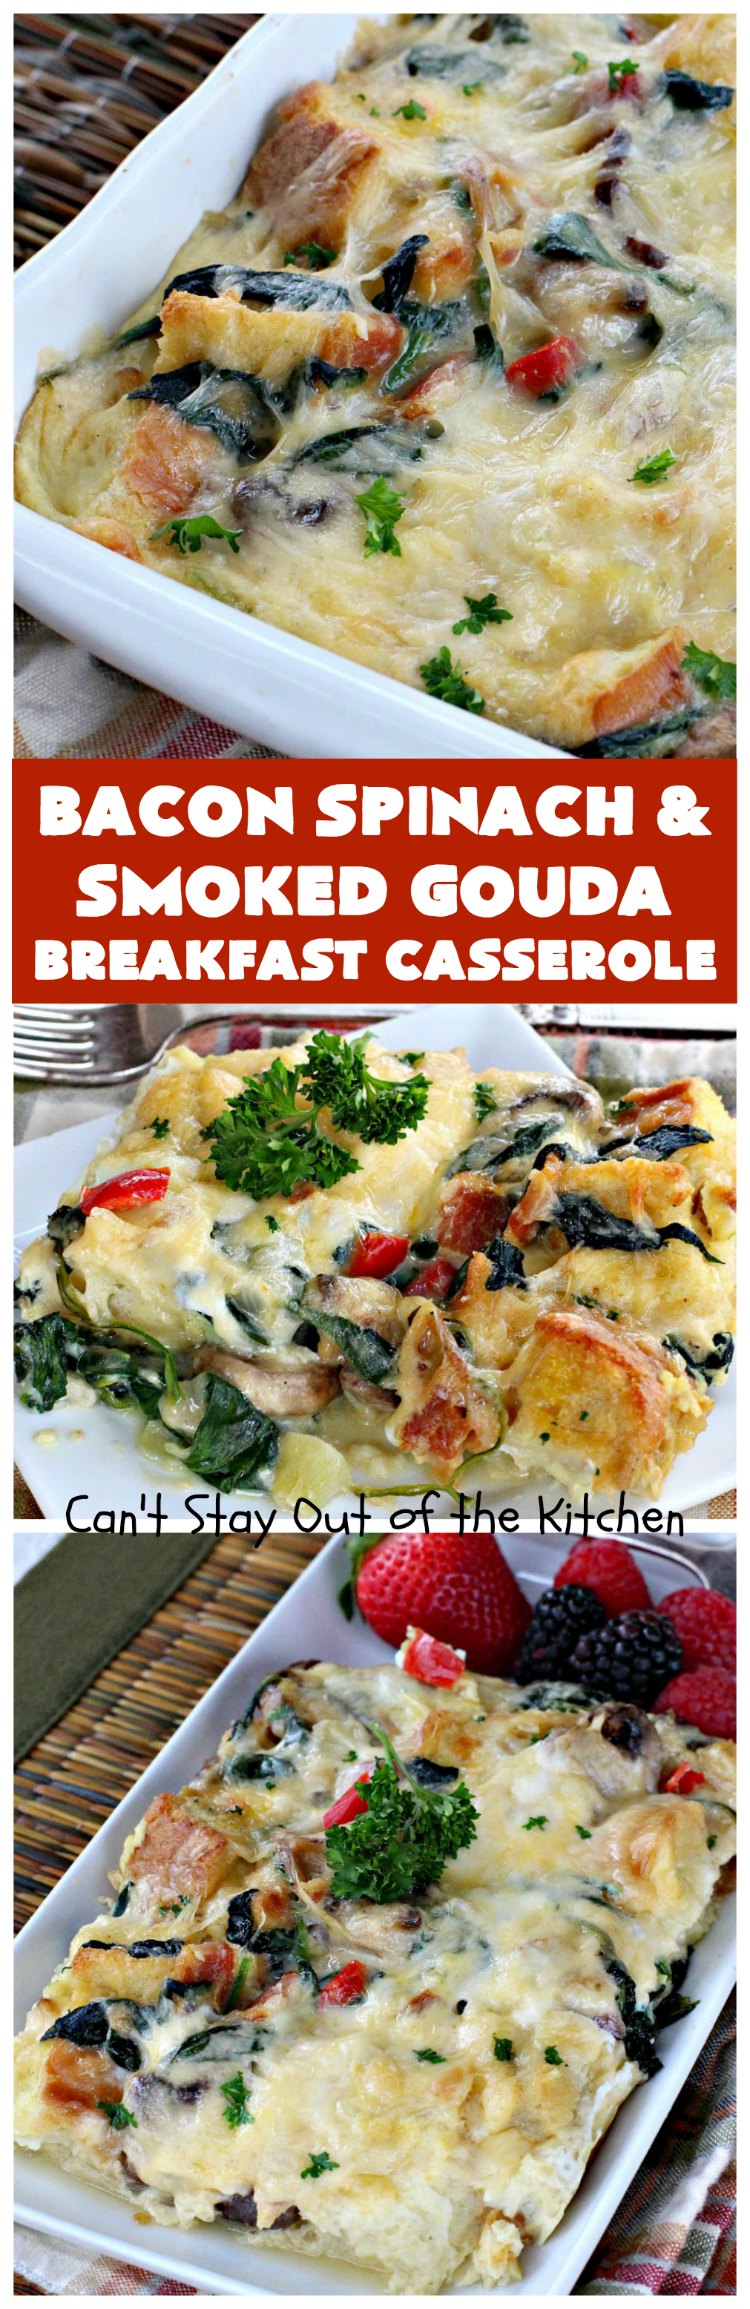 Bacon Spinach and Smoked Gouda Breakfast Casserole | Can't Stay Out of the Kitchen | this fantastic #breakfast #casserole is the best ever! It's made with toasted #FrenchBread cubes, #spinach, #bacon, #mushrooms & #GoudaCheese. It's perfect for a #holiday #breakfast like #Christmas or #NewYearsDay. So easy since it's prepared the day before! #cheese #pork #HolidayBreakfast #HolidayCasserole #ChristmasBreakfast #NewYearsDayBreakfast #BreakfastCasserole